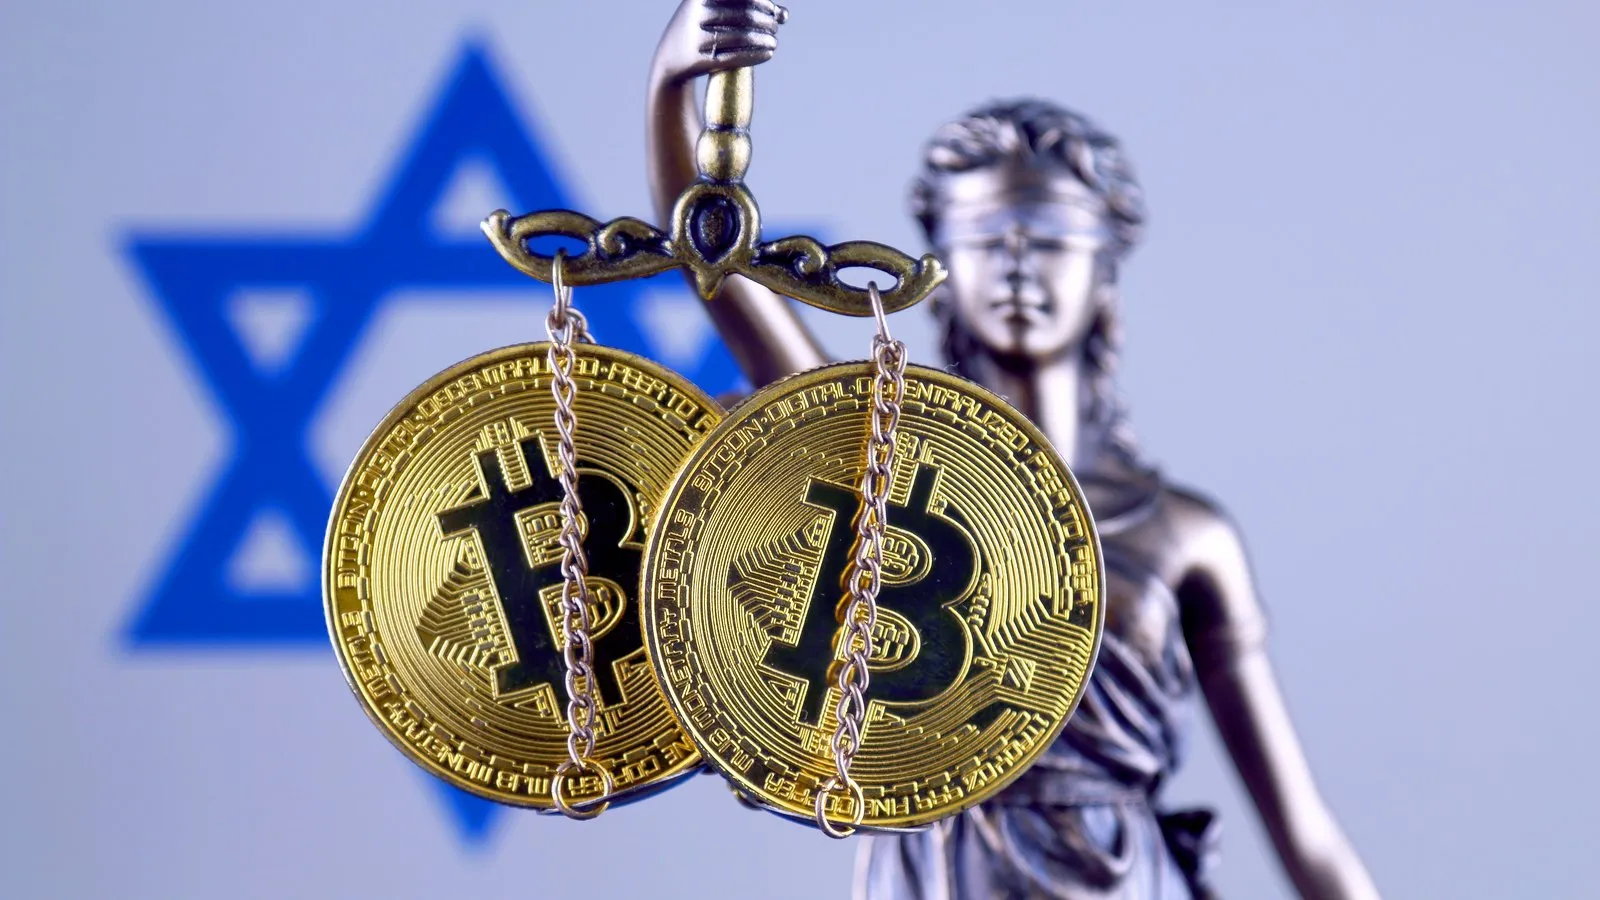 Seven crypto companies have been hit with class action lawsuits. Image: Shutterstock.